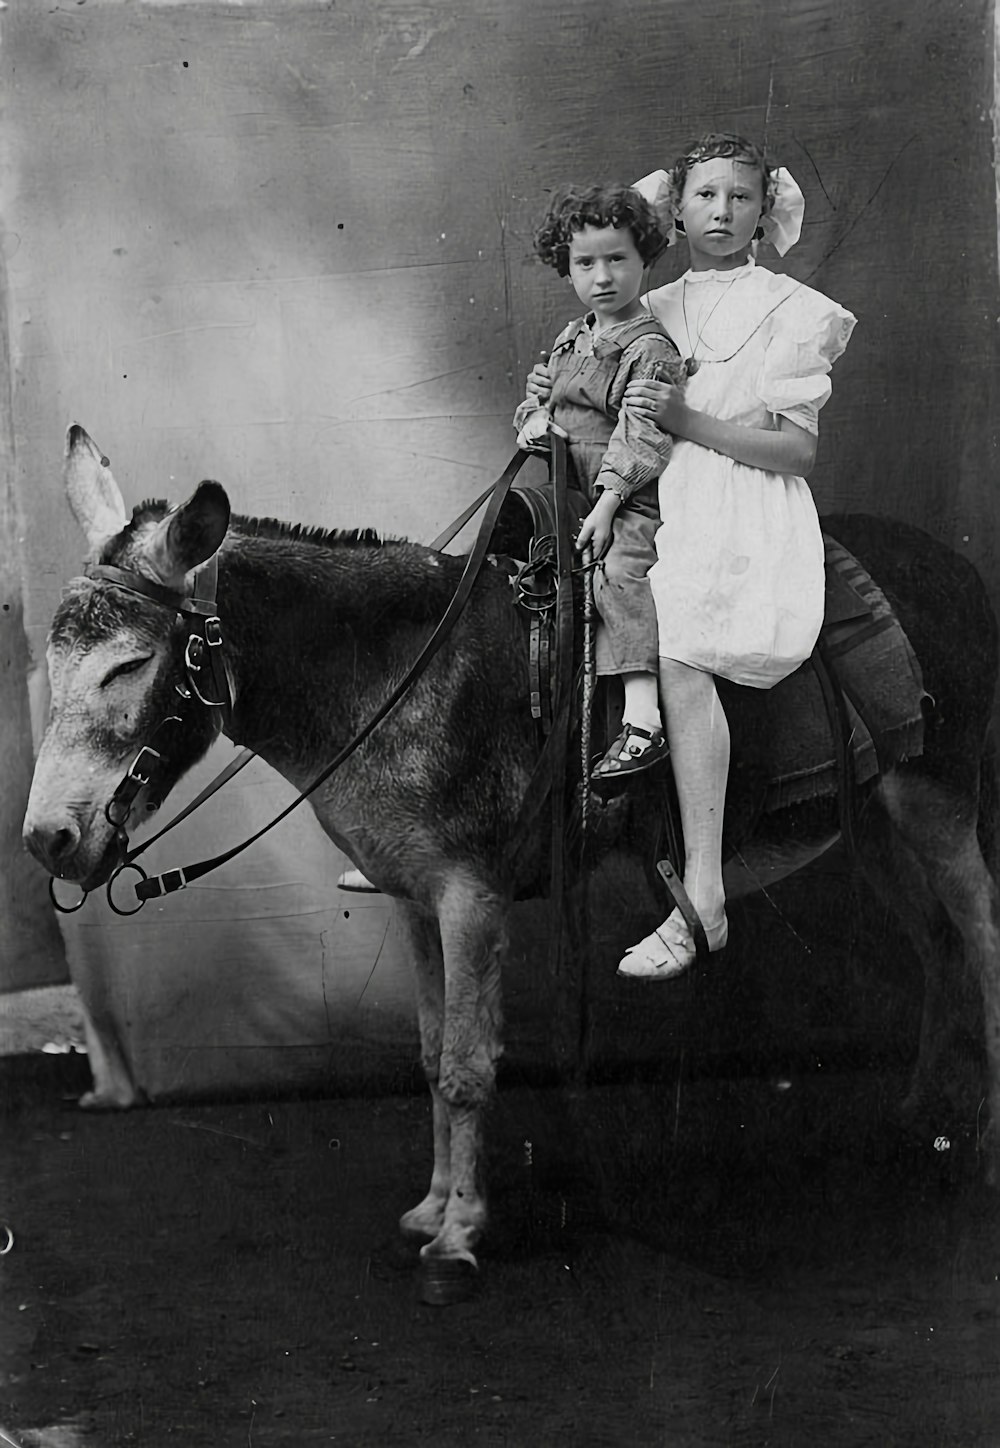 an old photo of two children on a donkey